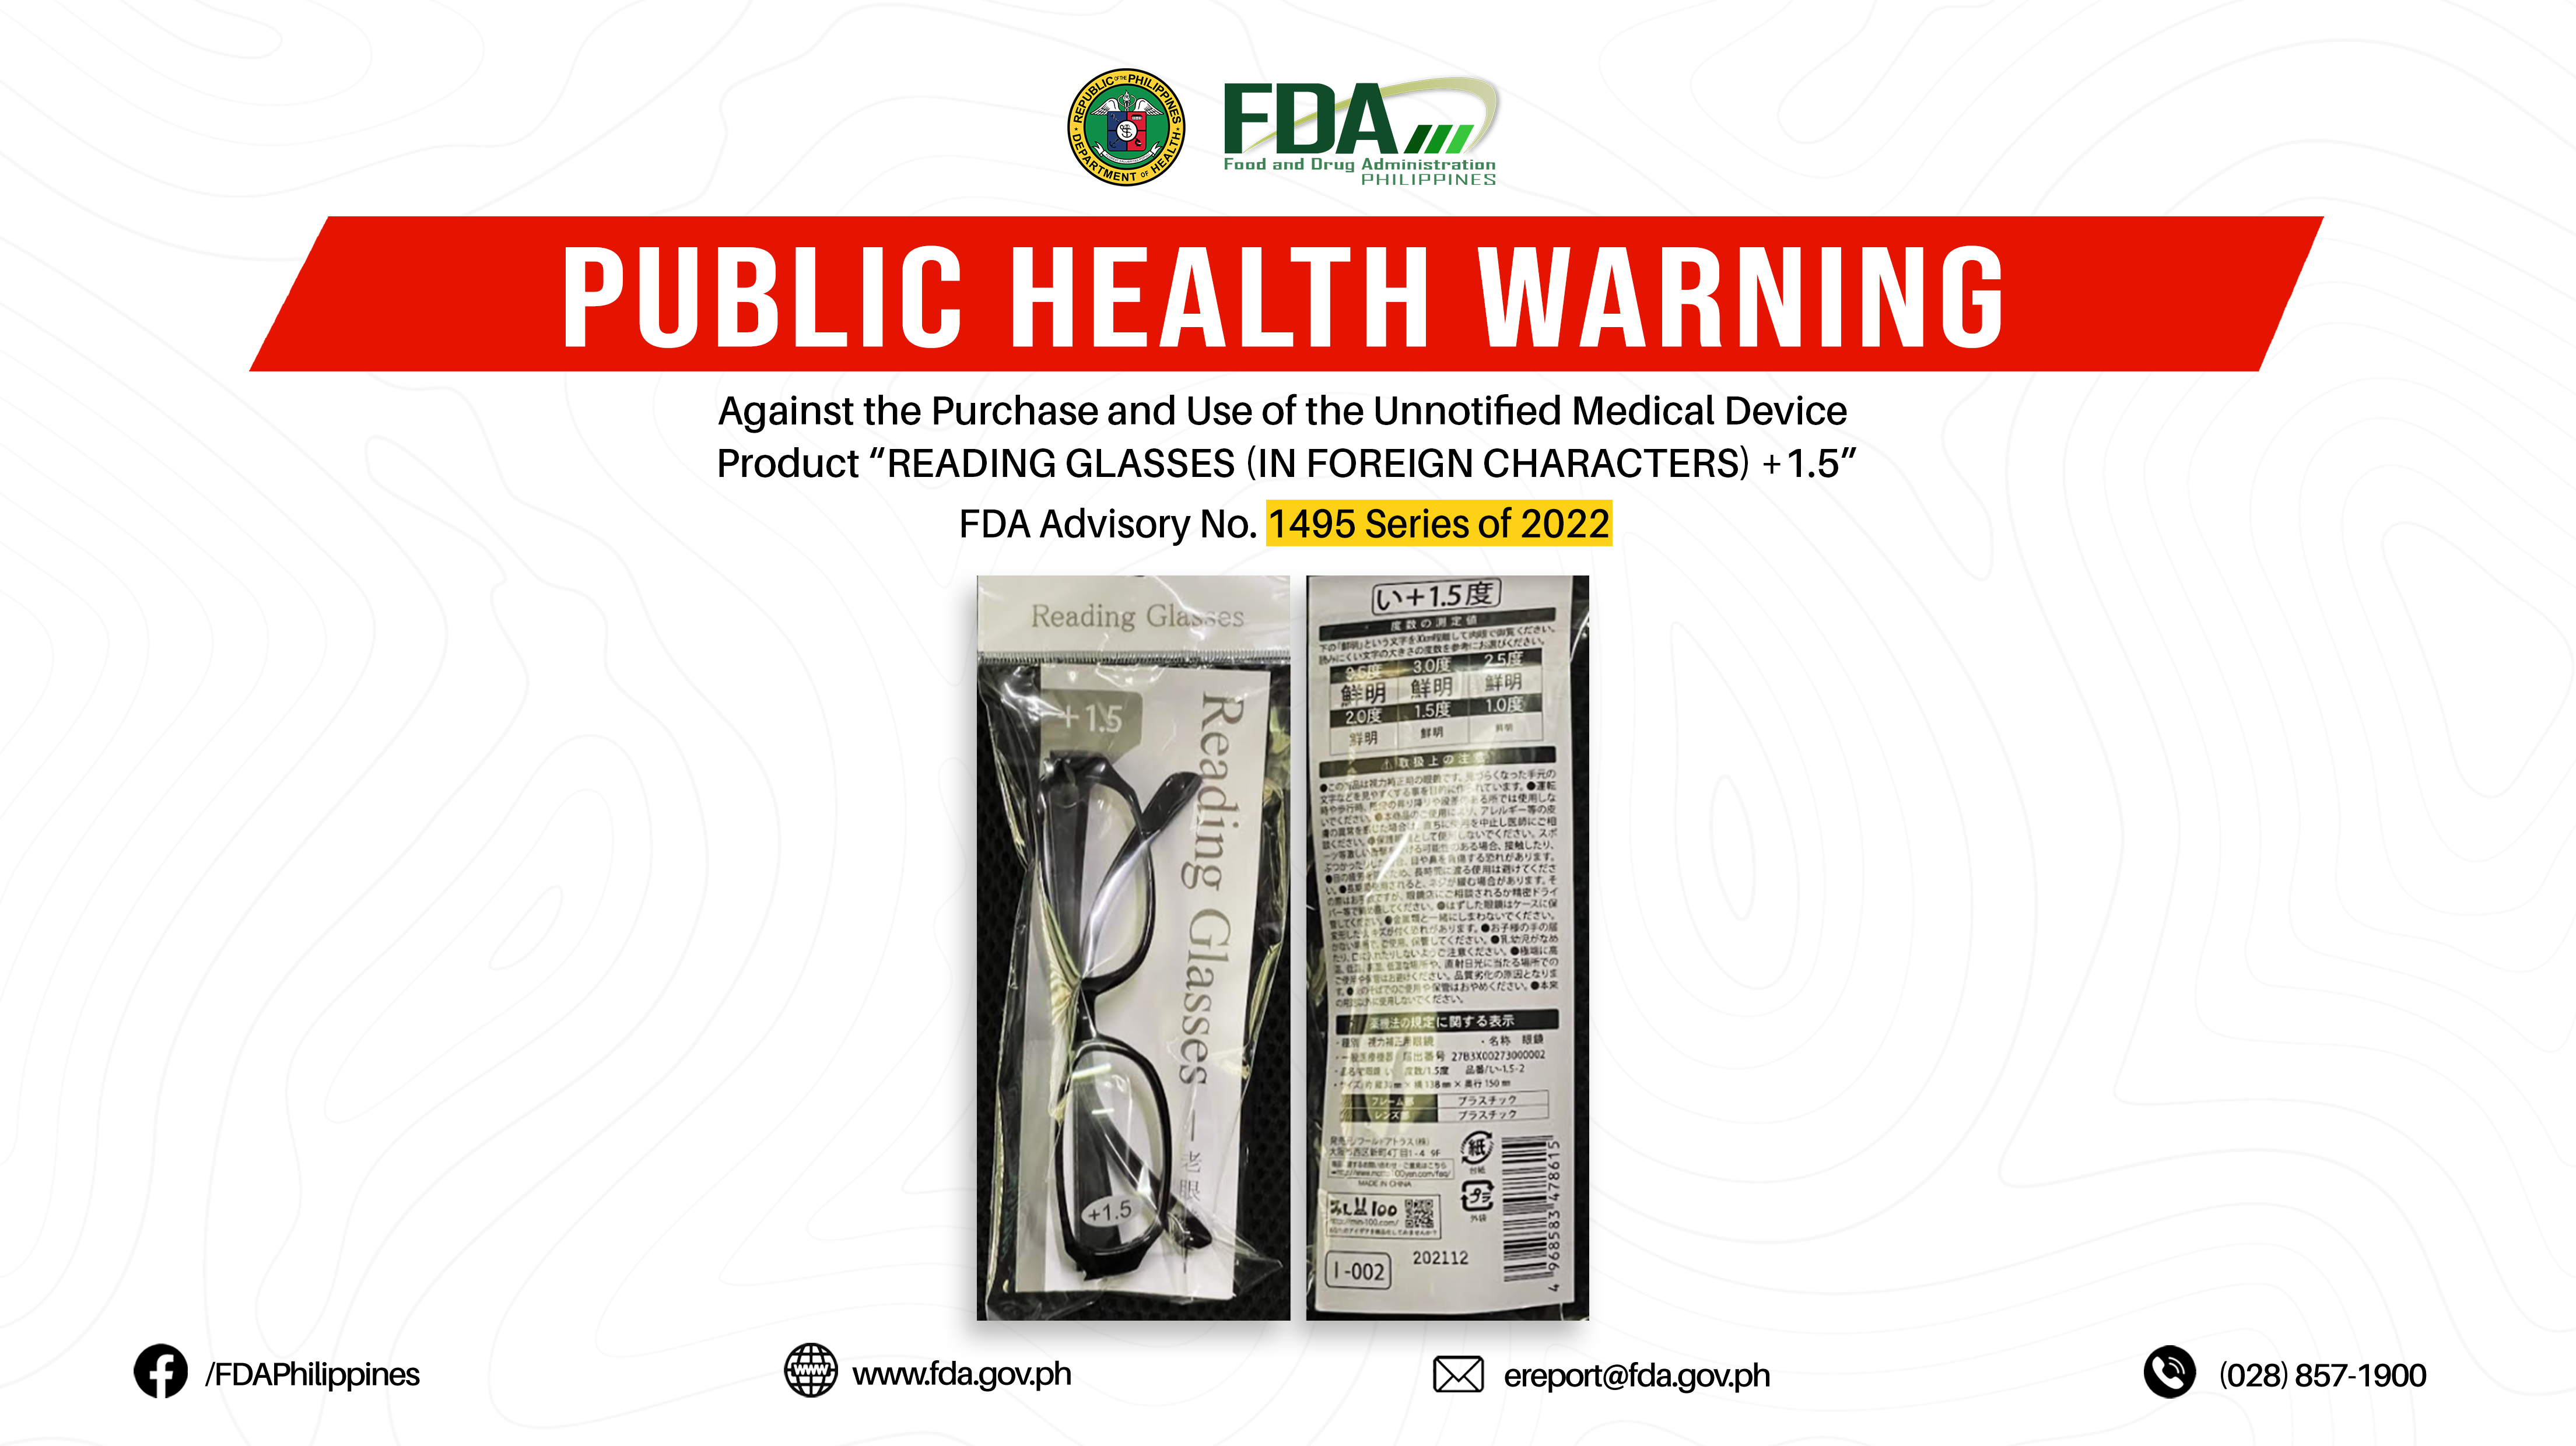 FDA Advisory No.2022-1495 || Public Health Warning Against the Purchase and Use of the Unnotified Medical Device Product “READING GLASSES (IN FOREIGN CHARACTERS) +1.5”